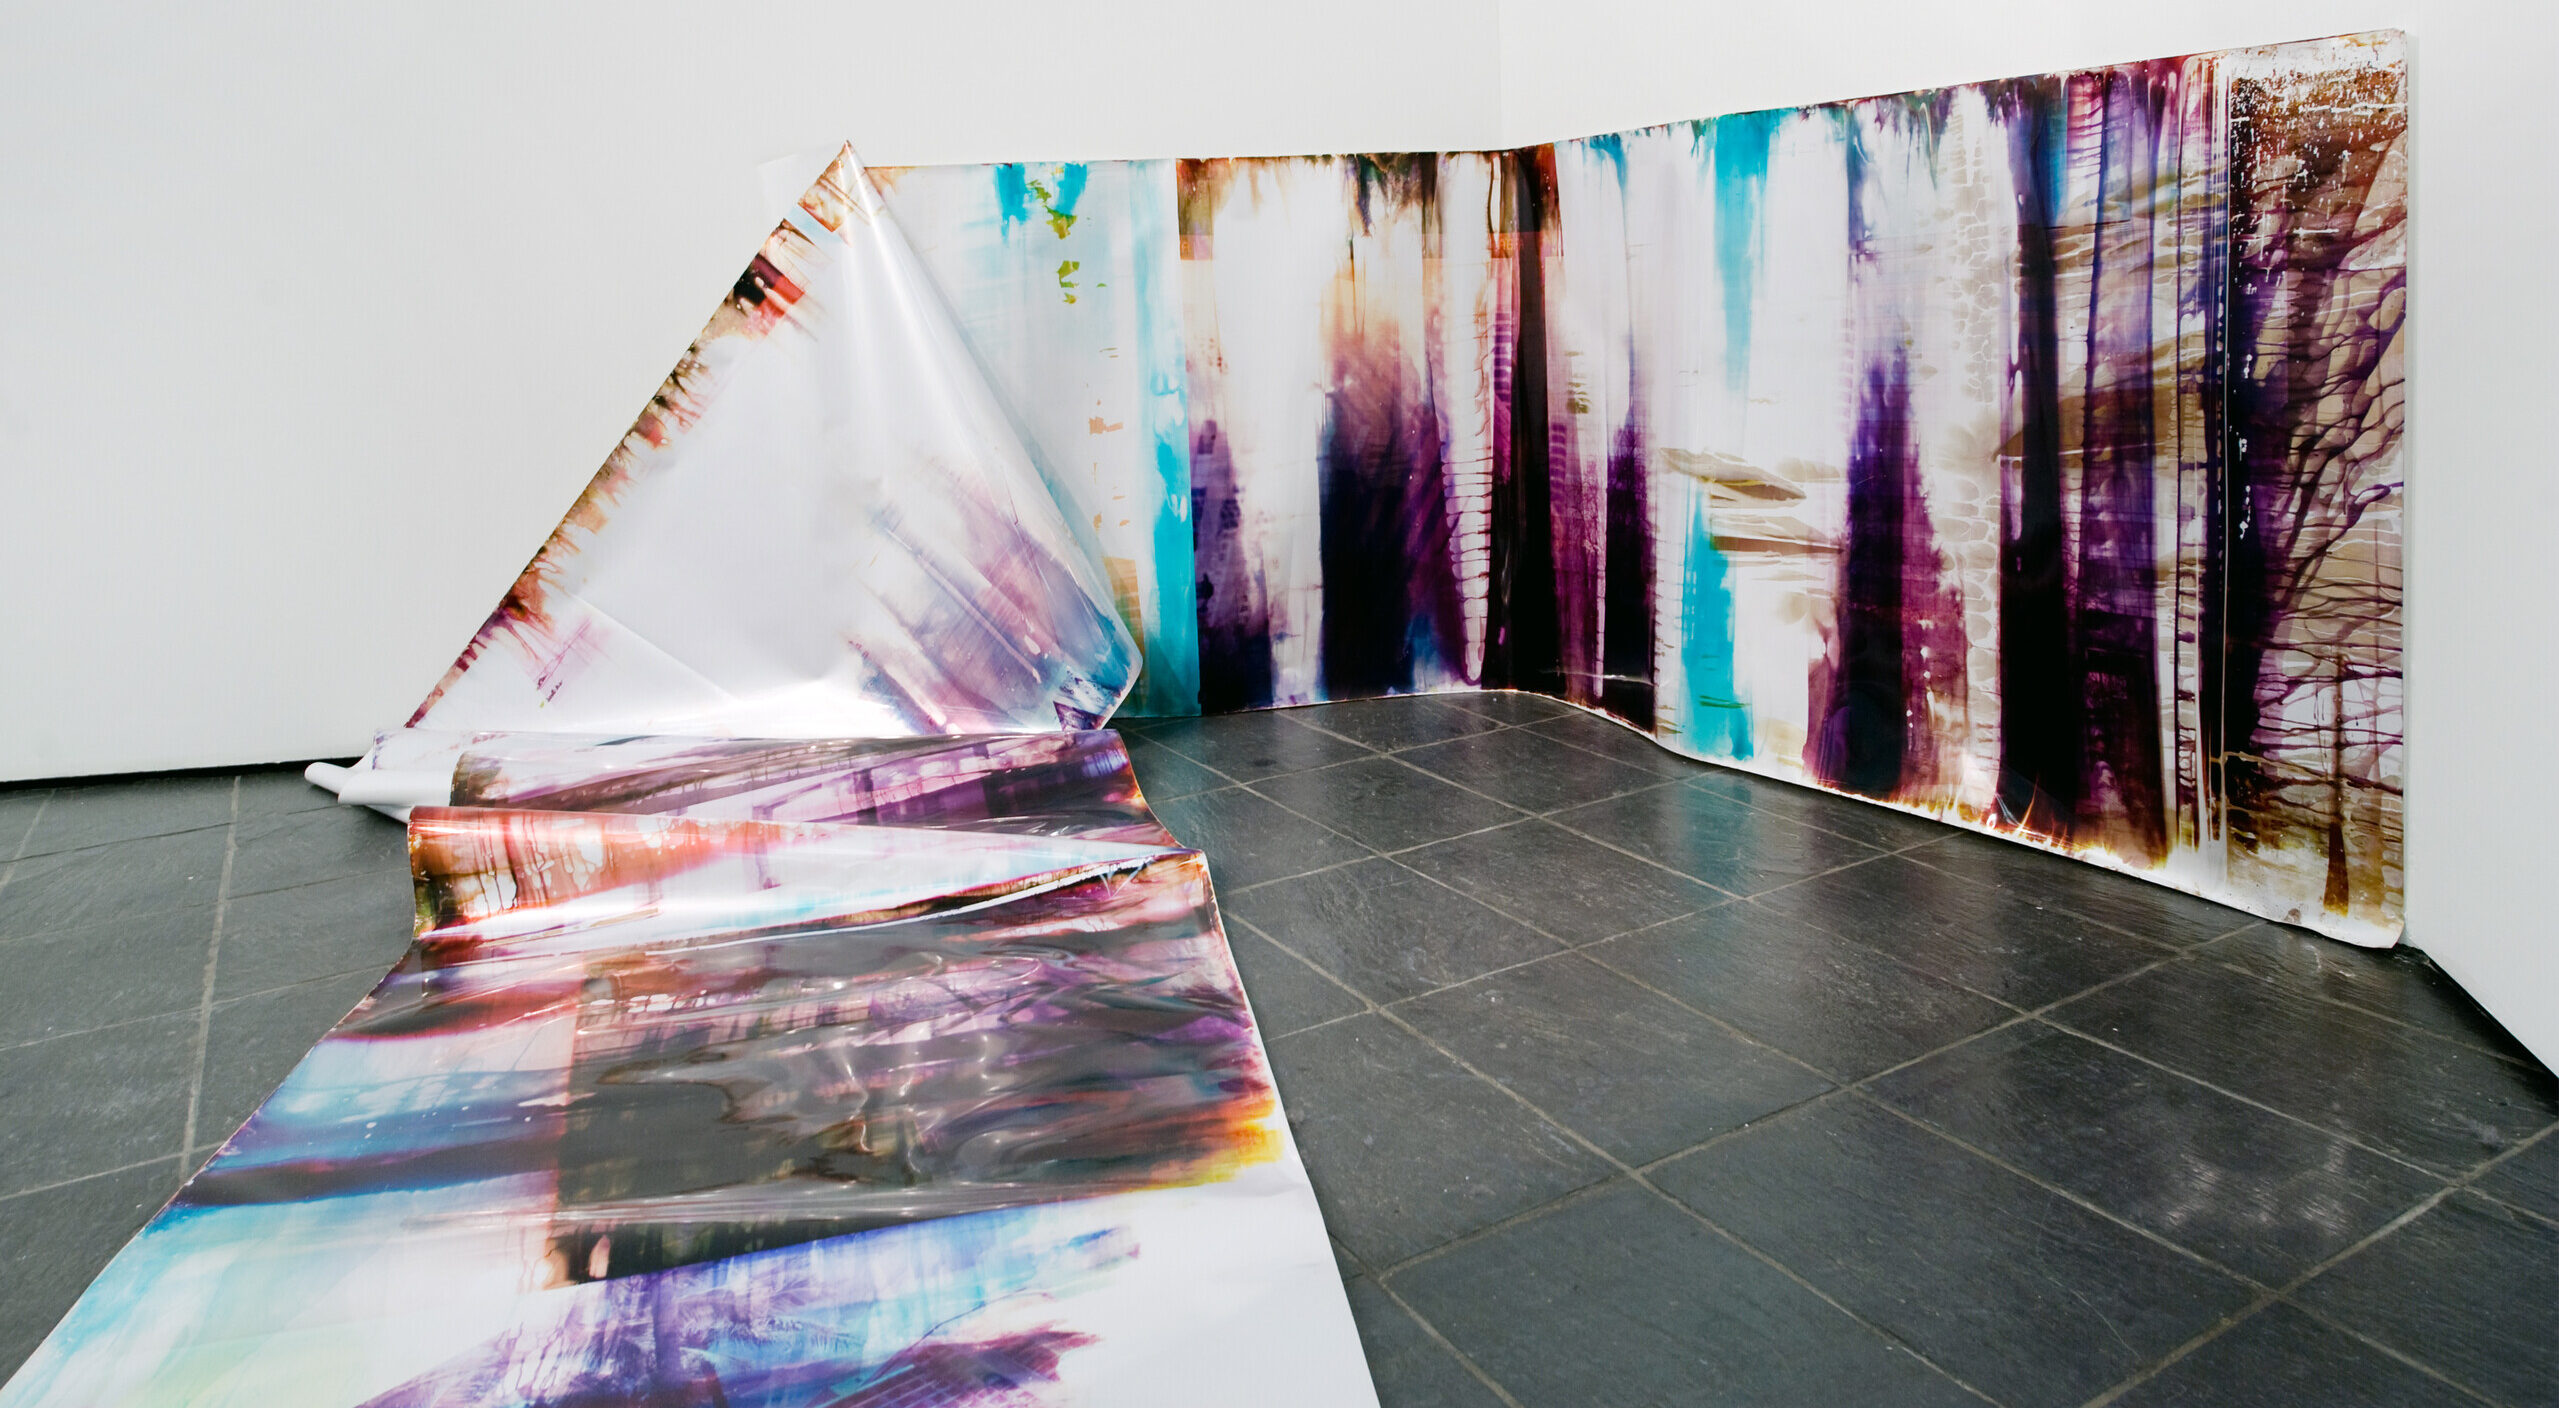 In an art gallery with white walls, a long, snake-like piece of metallic paper printed with splotches of black, blue, purple, and orange in an abstract pattern is partly affixed to the wall. At one point the paper falls from the wall and cascades onto the floor and further into the room.